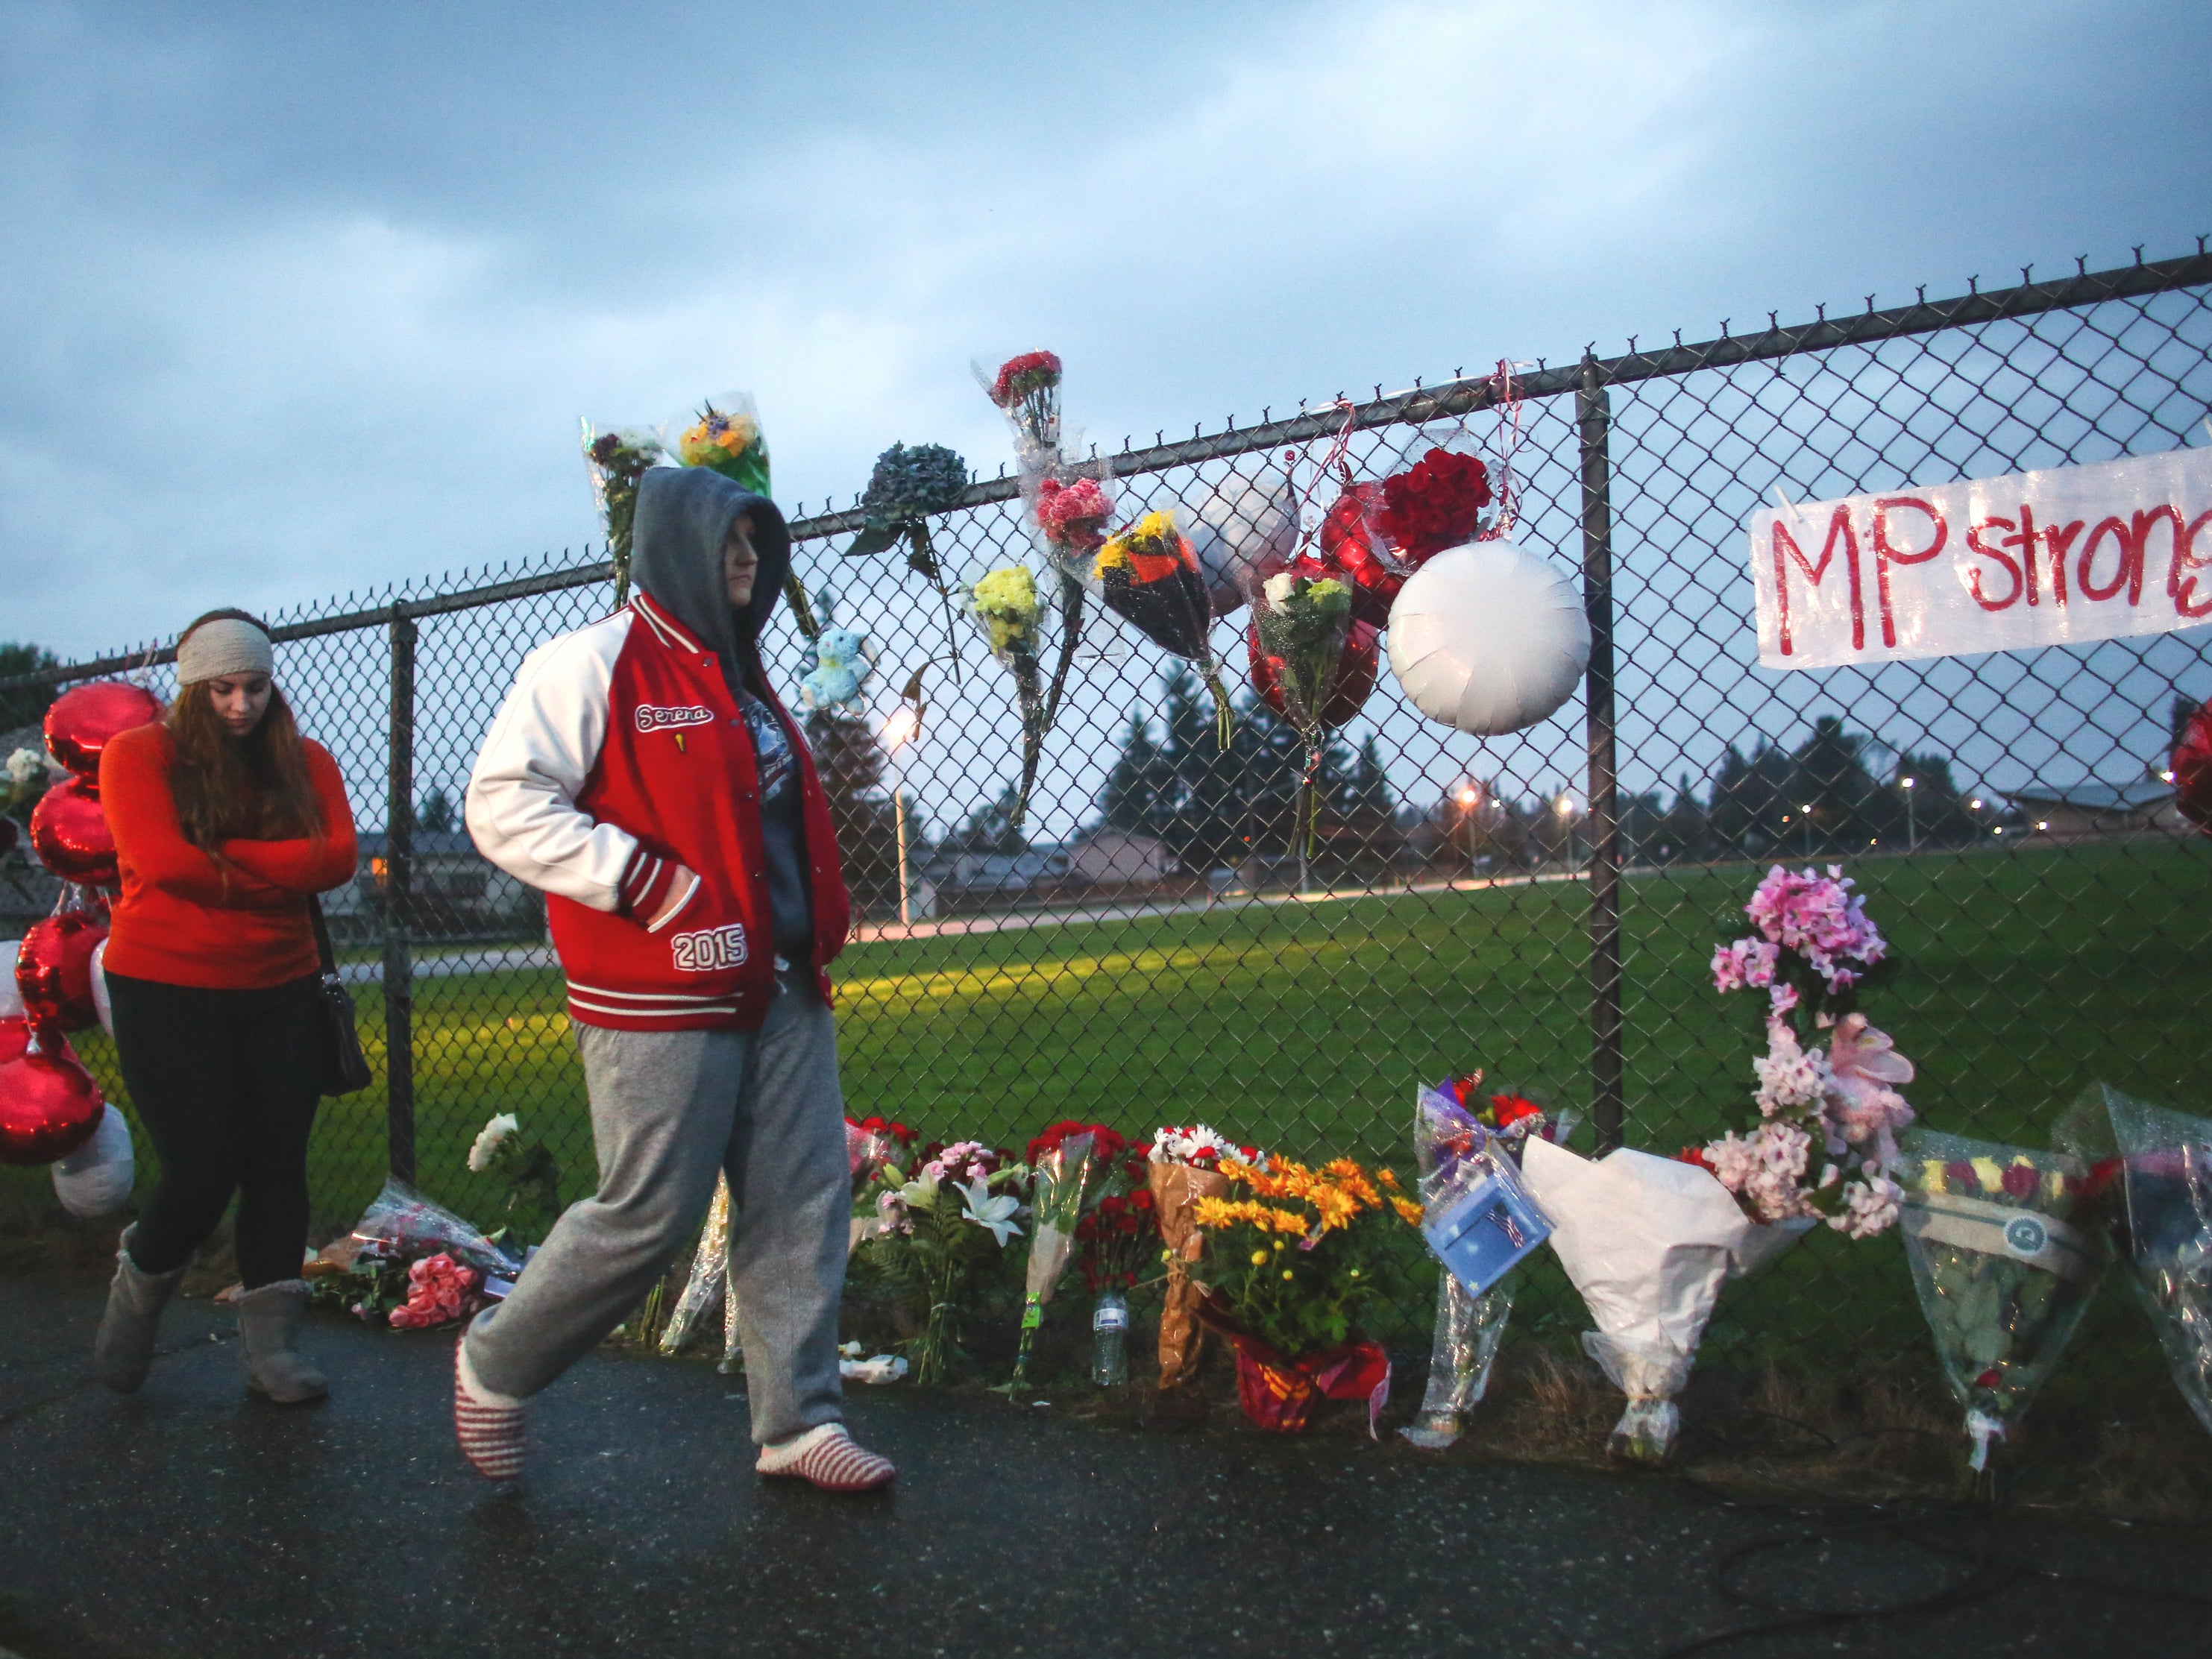 Flowers are placed in memorial outside Marysville-Pilchuck High School after the shooting